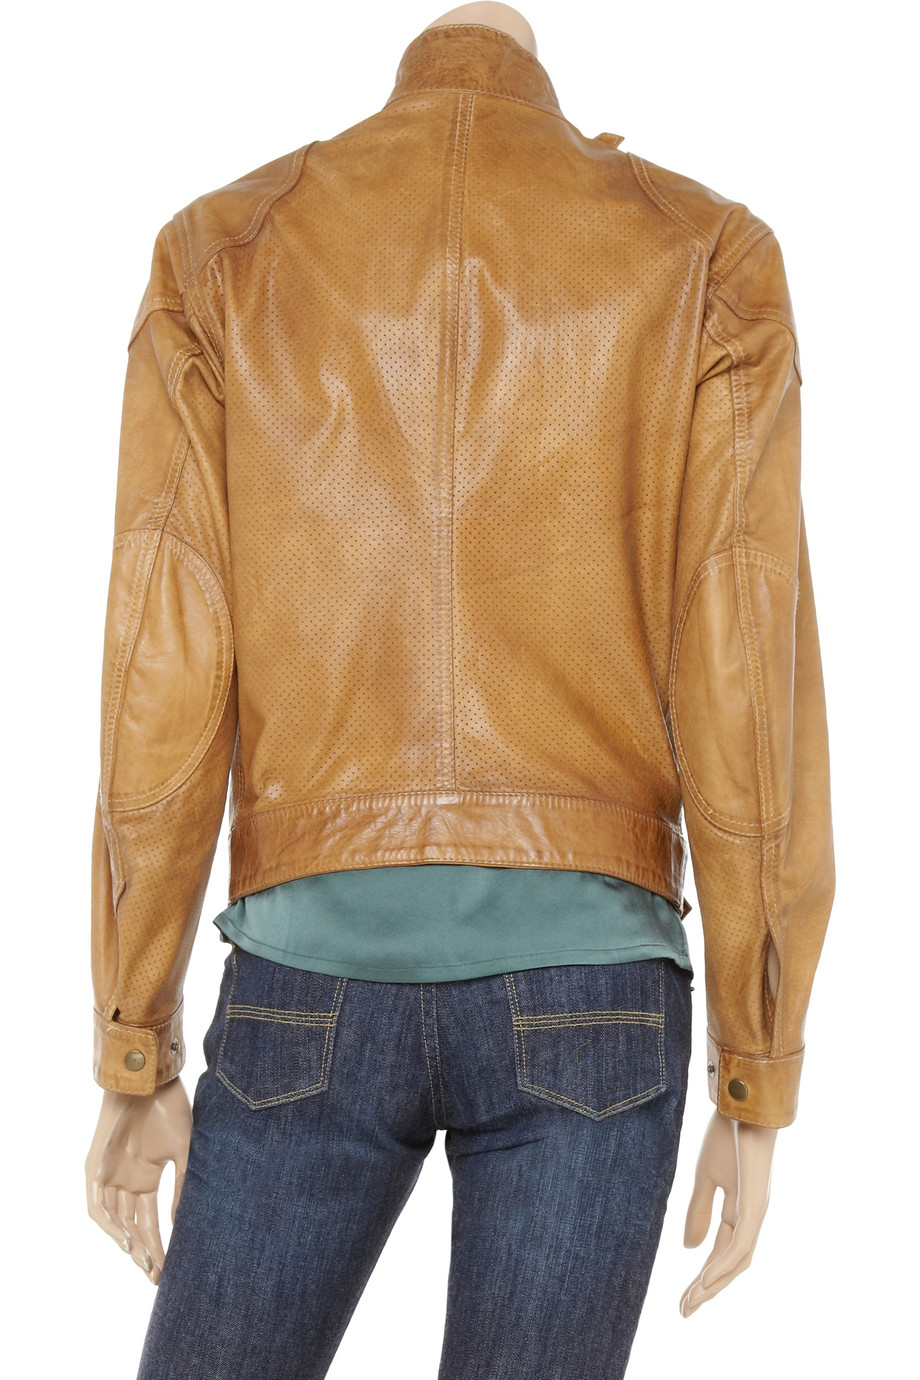 Belstaff Cougar Perforated-leather Jacket in Brown - Lyst